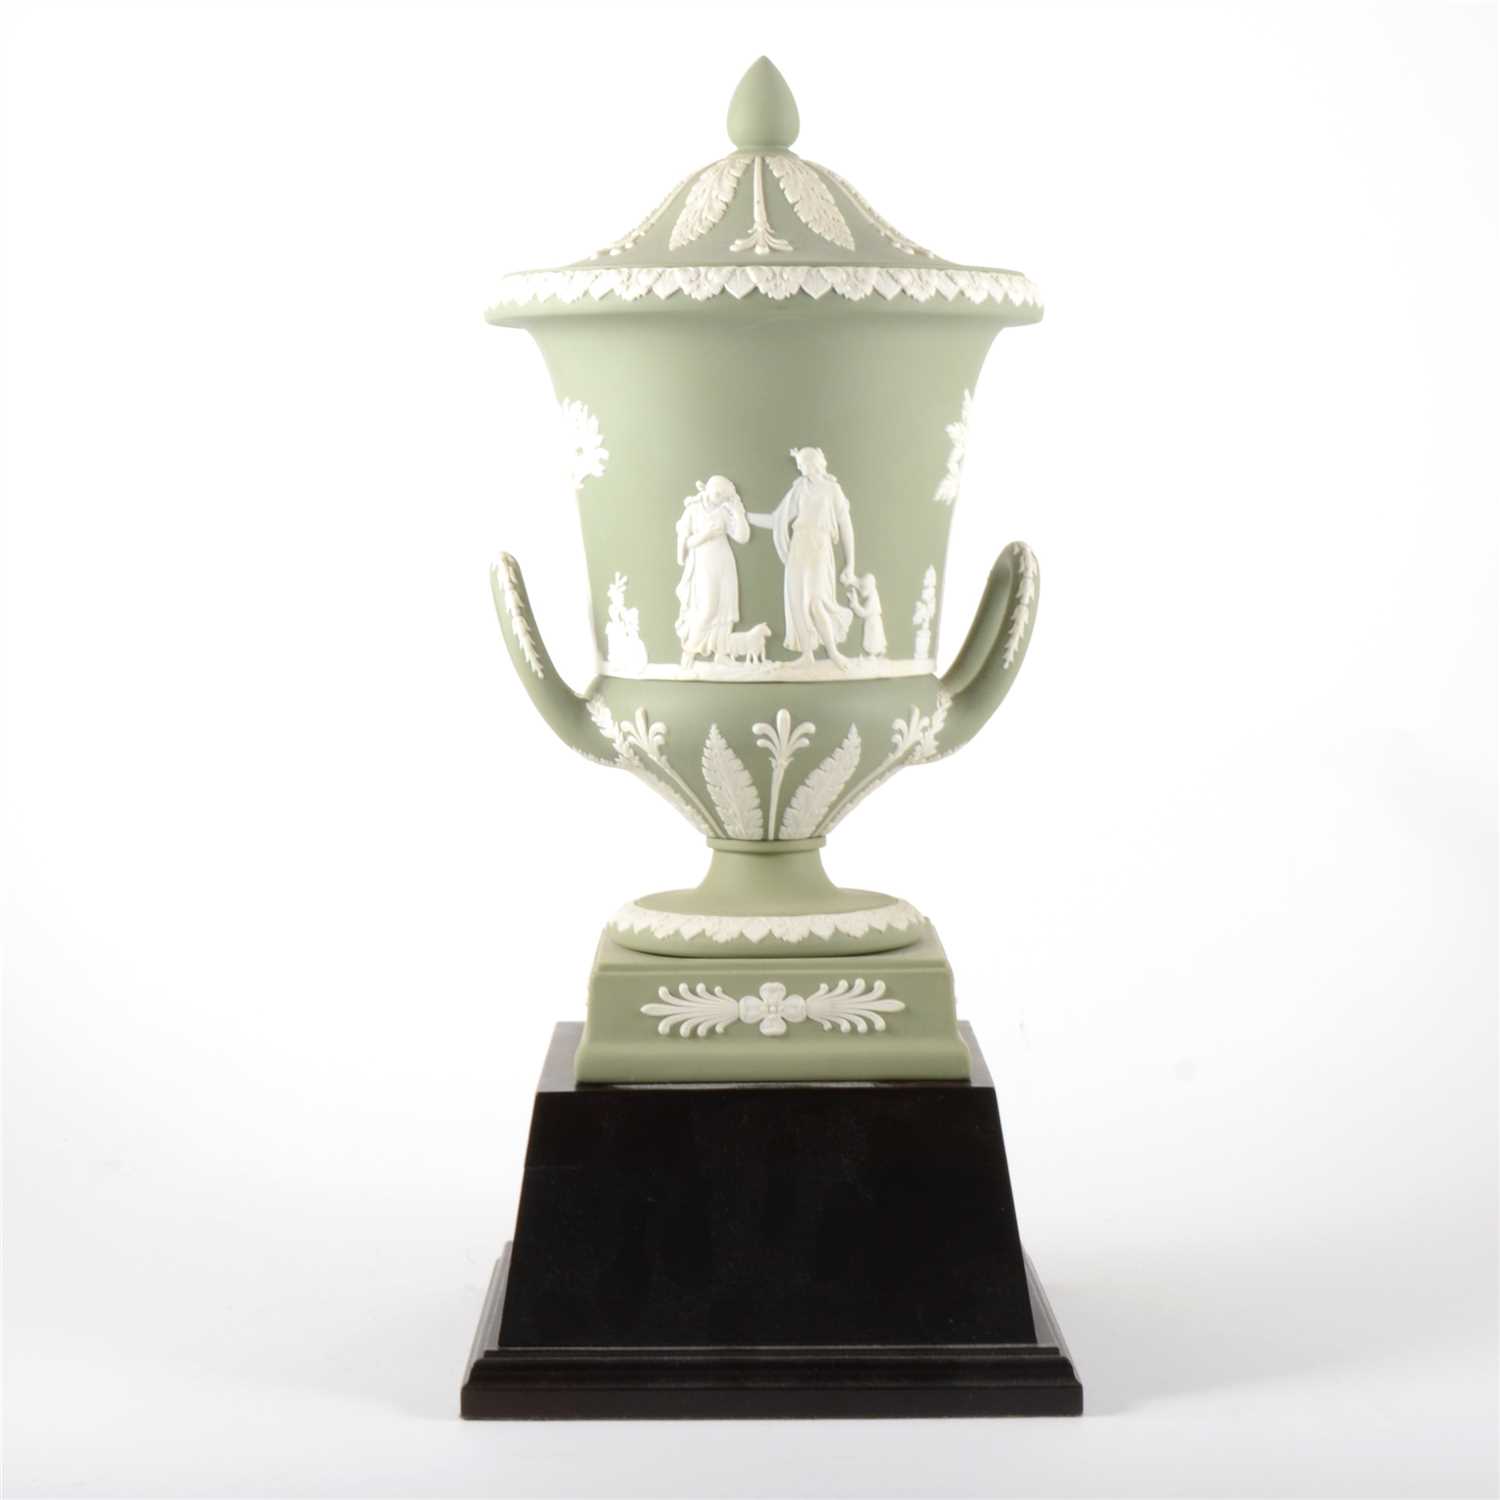 Lot 27 - A green Jasperware campagna vase and cover, by Wedgwood.